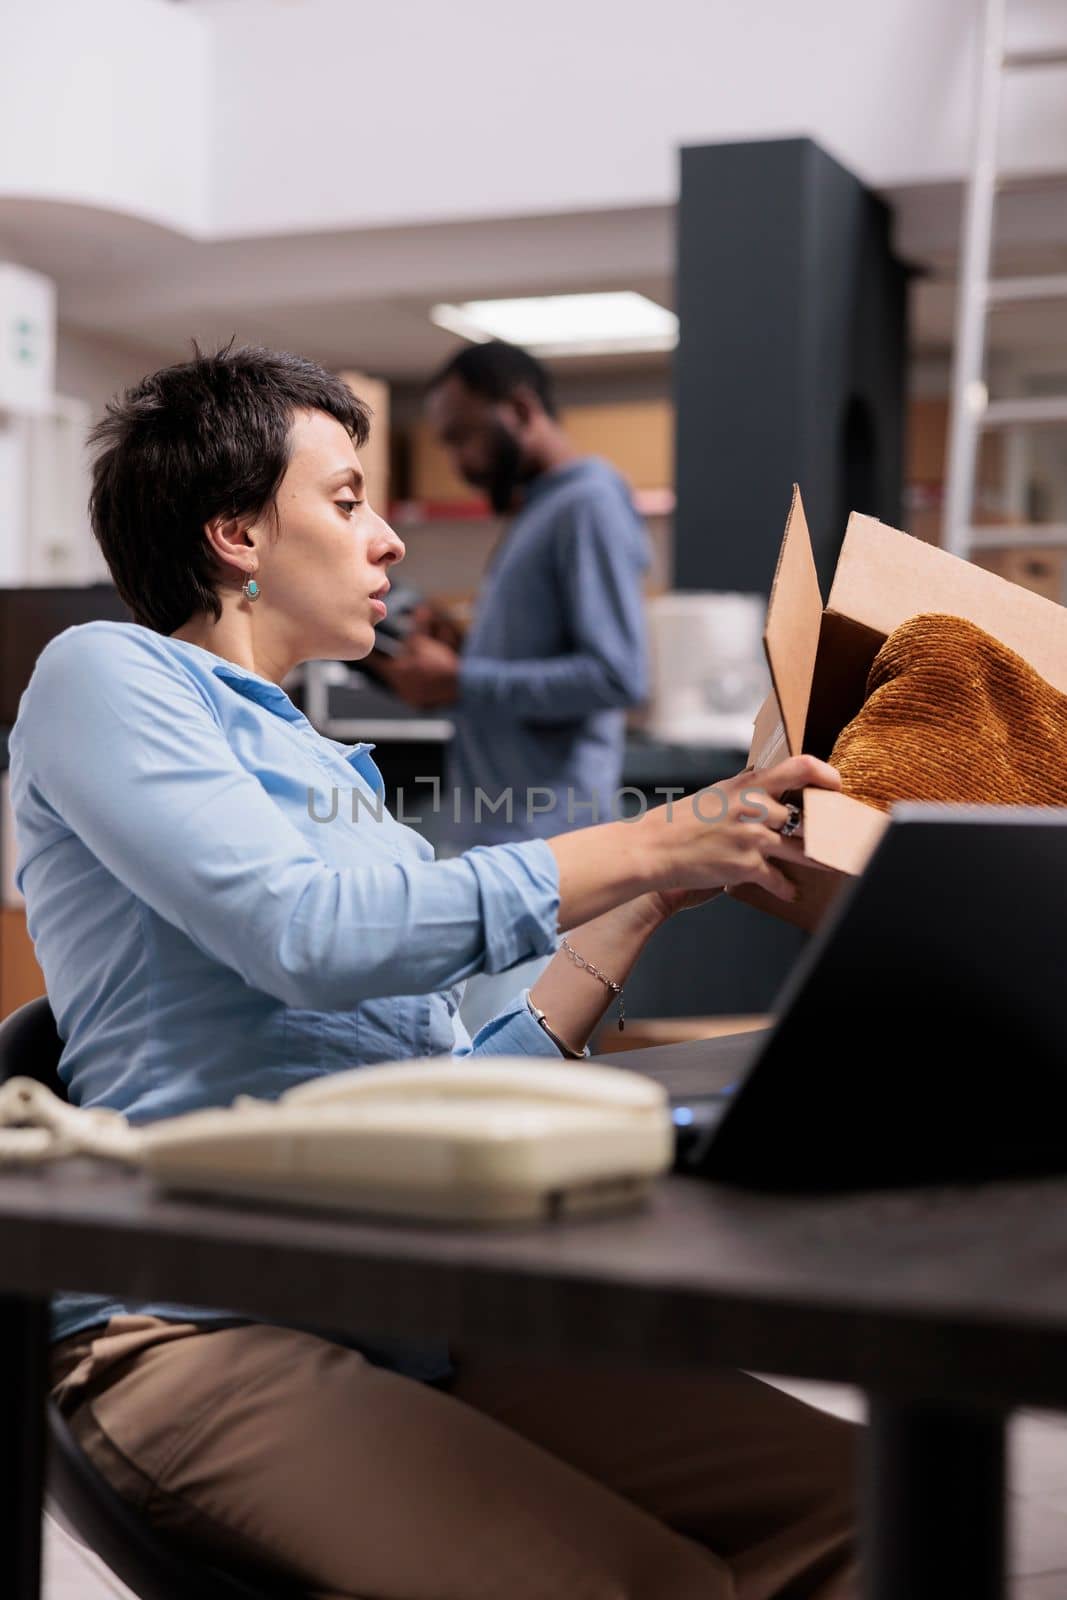 Storehouse employee looking at cardboard box checking shipping details before start preparing customer packages for delivering. Woman analyzing cargo stock on laptop computer working in warehouse